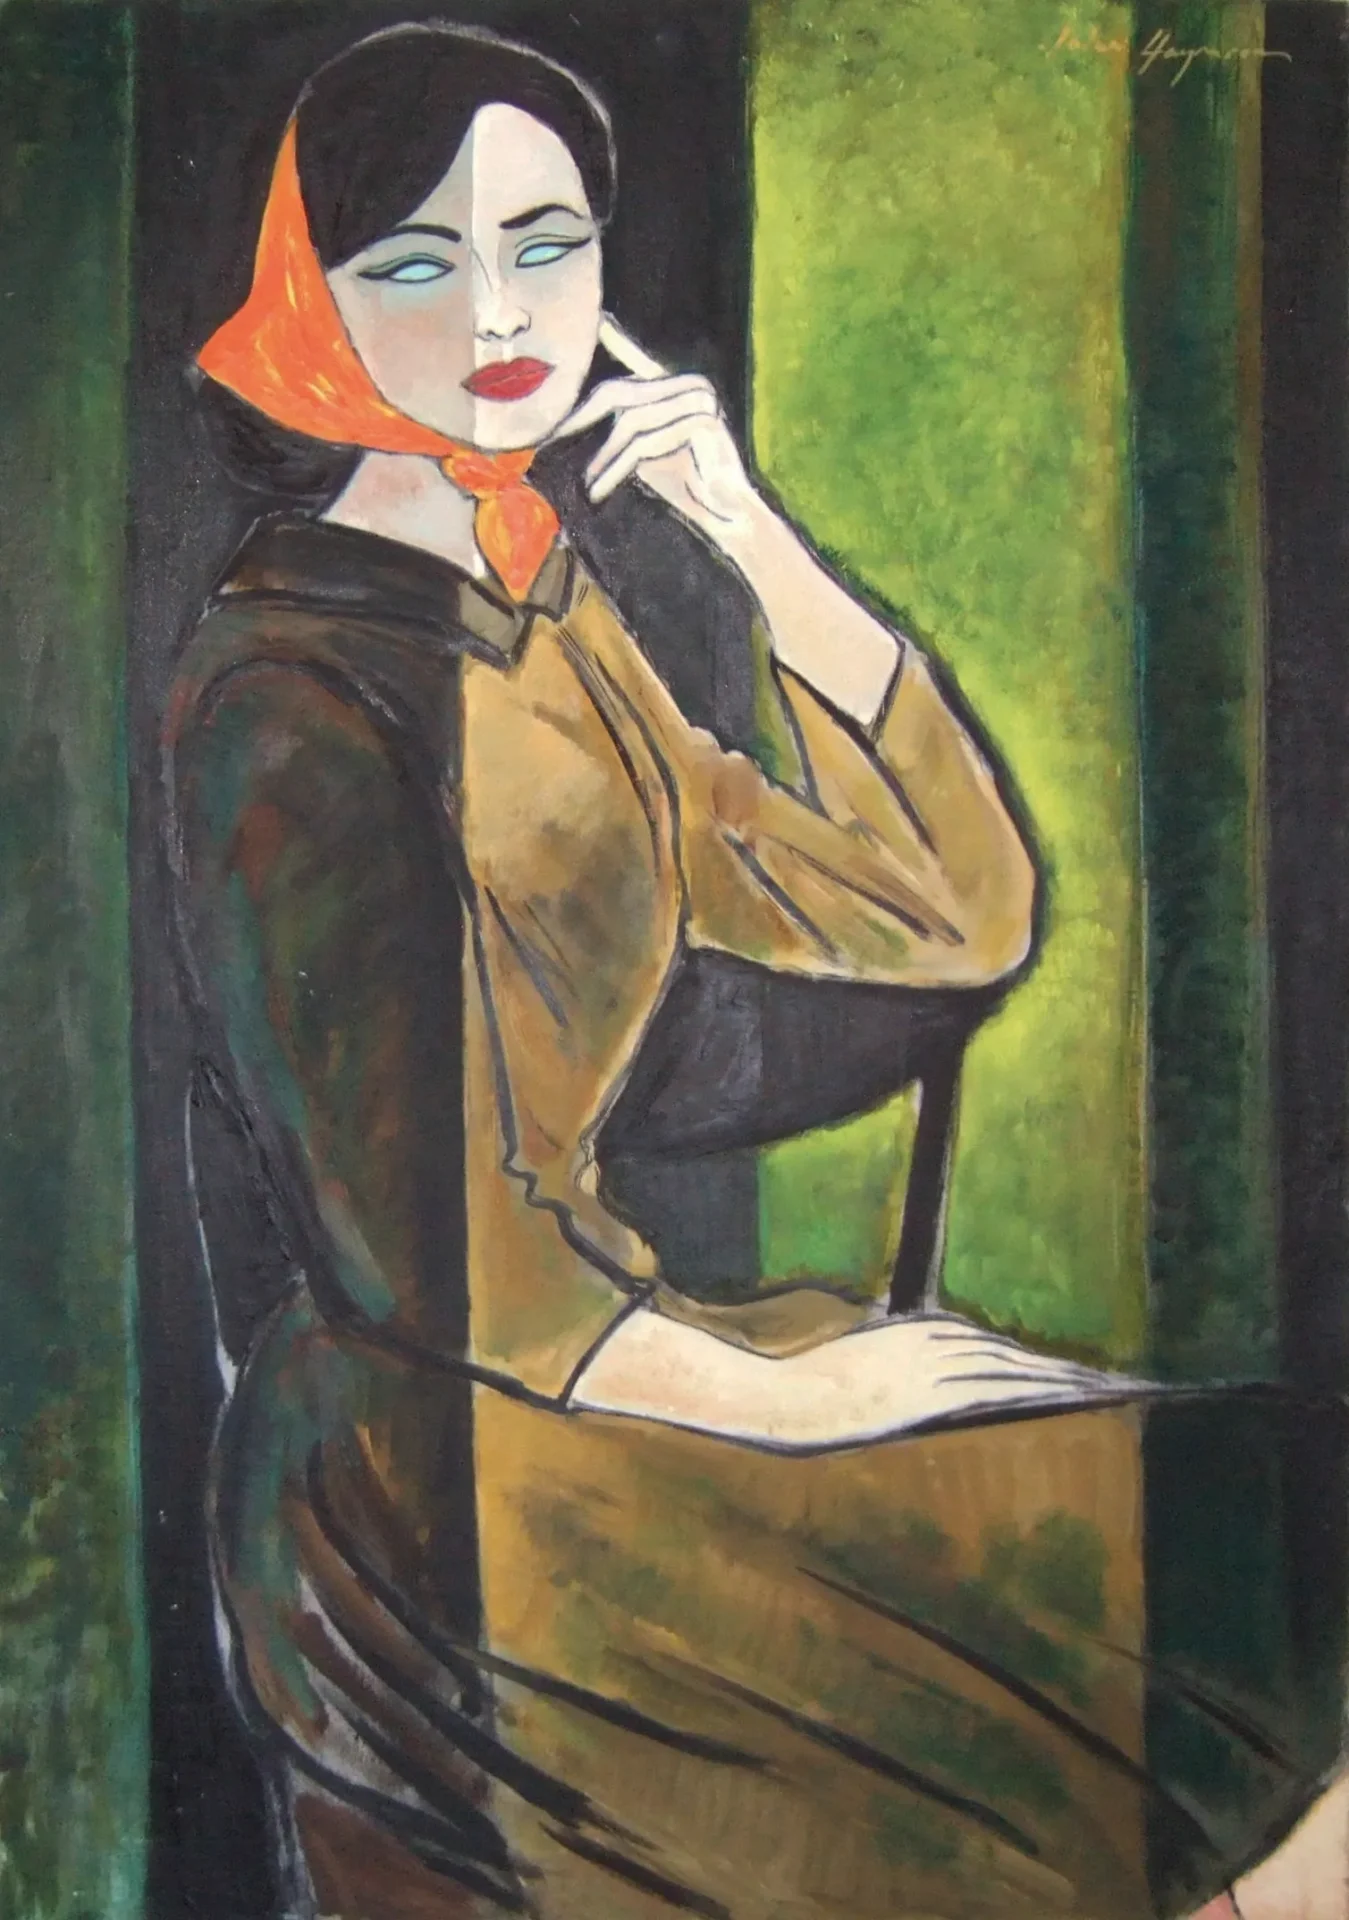 A painting of a woman with a scarf on her neck.